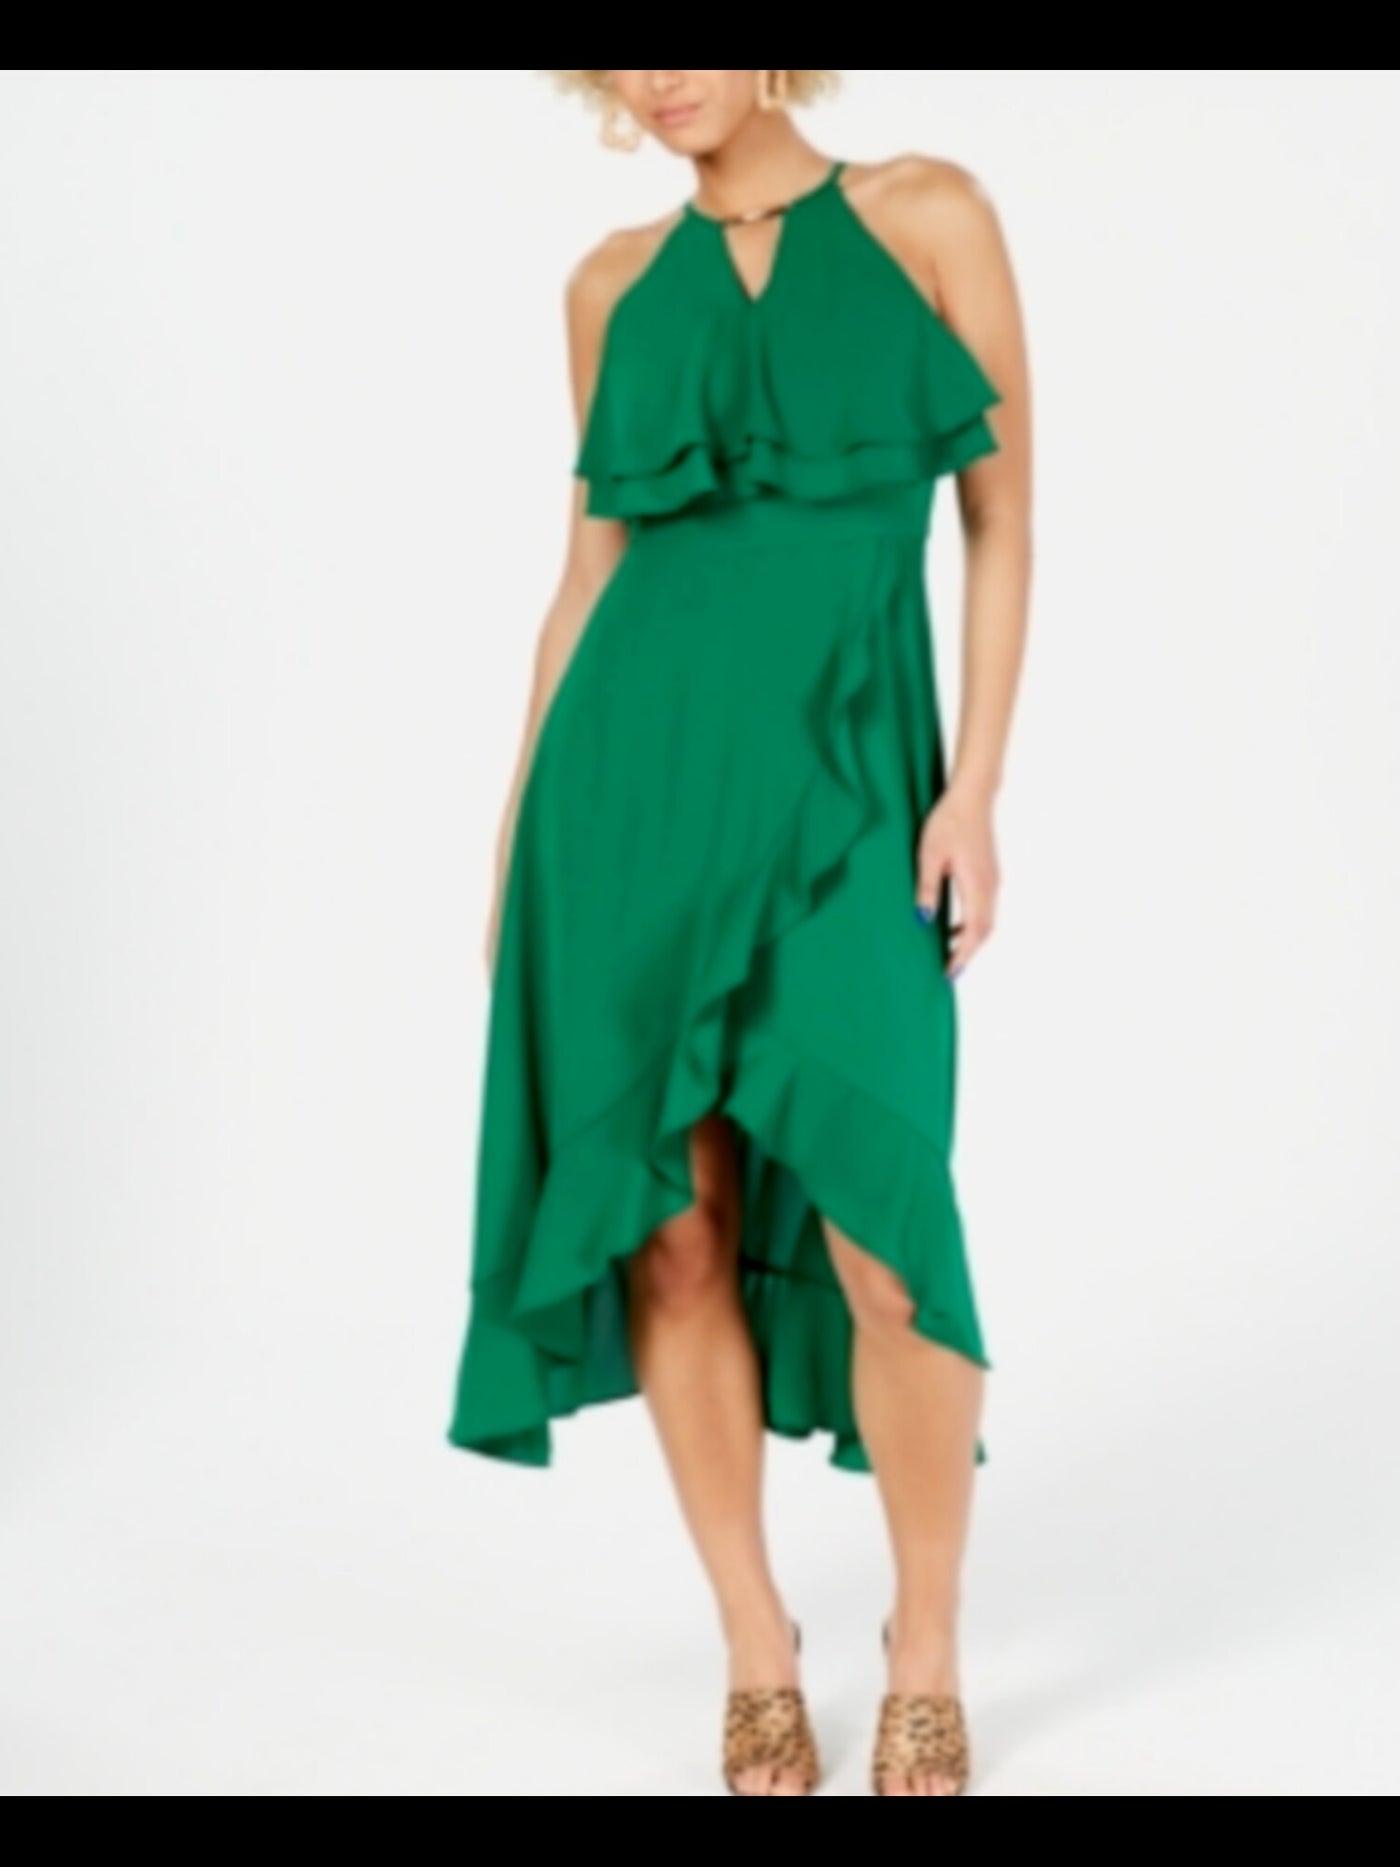 KENSIE Womens Green Embellished Ruffled Halter Popover Sleeveless Keyhole Below The Knee Party Fit + Flare Dress 4